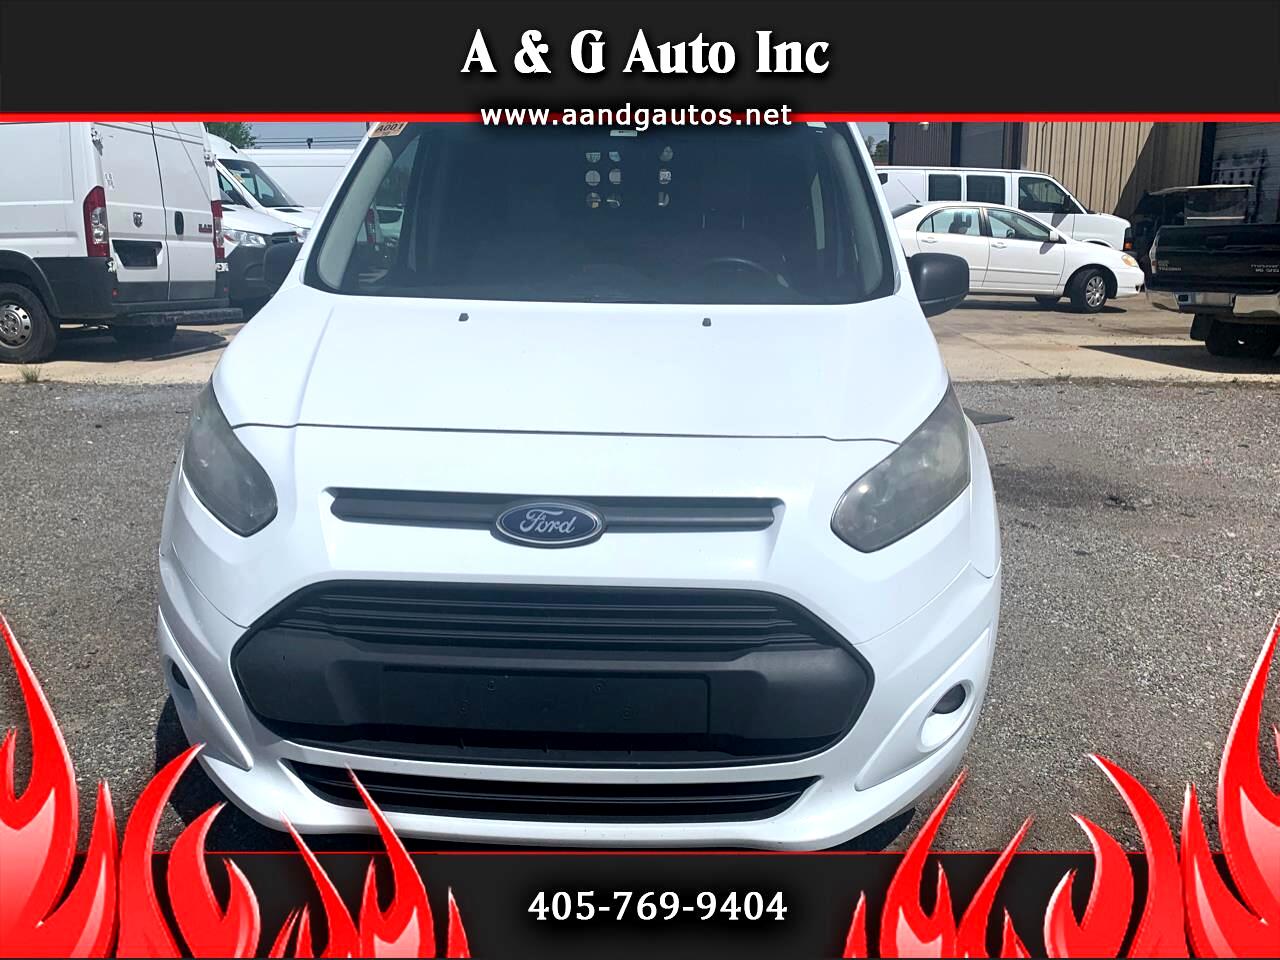 2014 Ford Transit Connect for sale in Oklahoma City OK 73141 by A & G Auto Inc